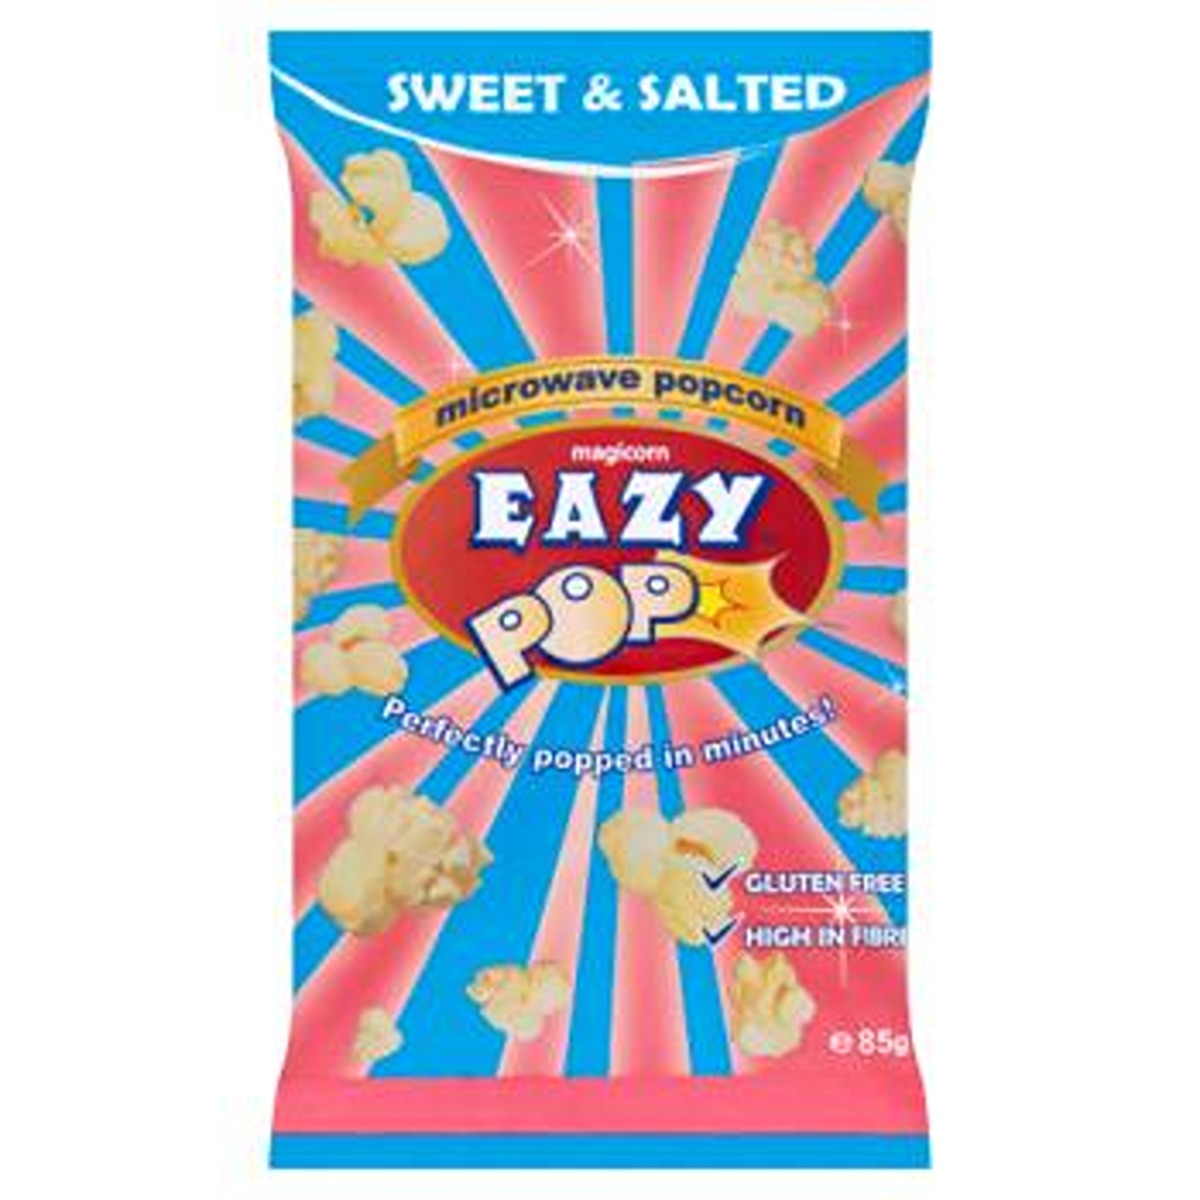 Eazy Pop - Magicorn Sweet & Salted Microwave Popcorn - 85g - Continental Food Store